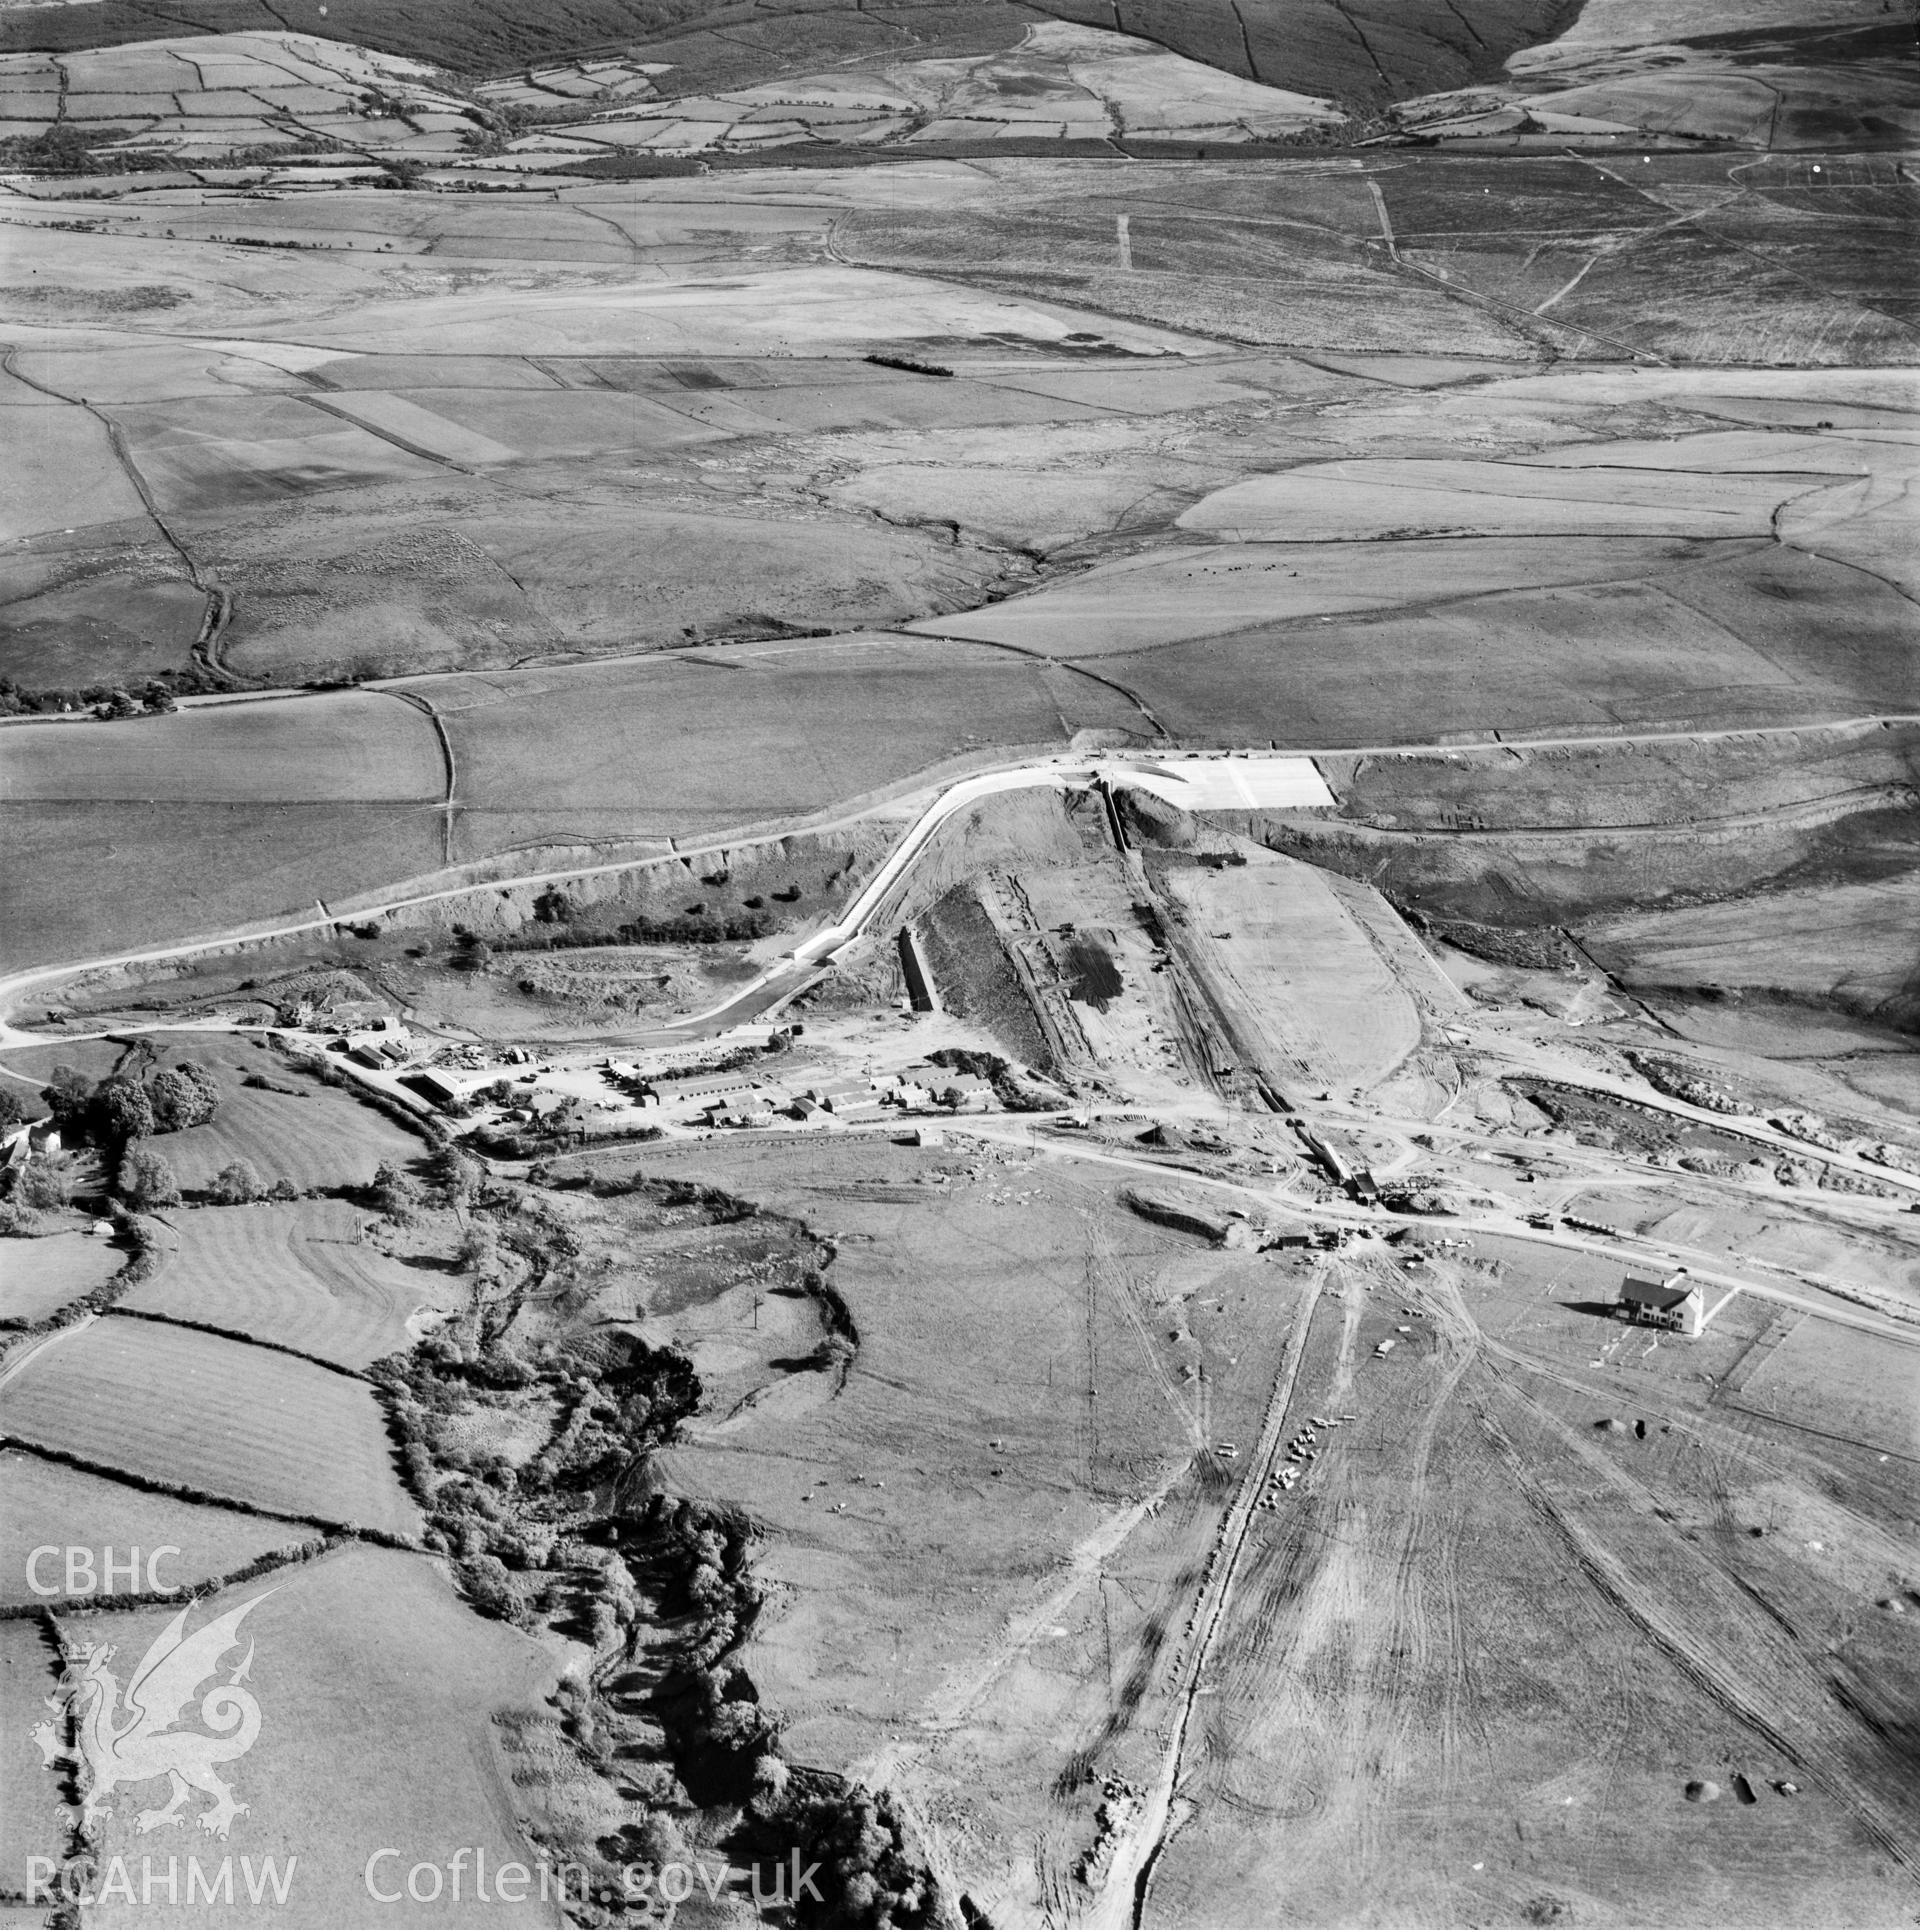 View showing construction of Usk reservoir, commissioned by County Borough of Swansea